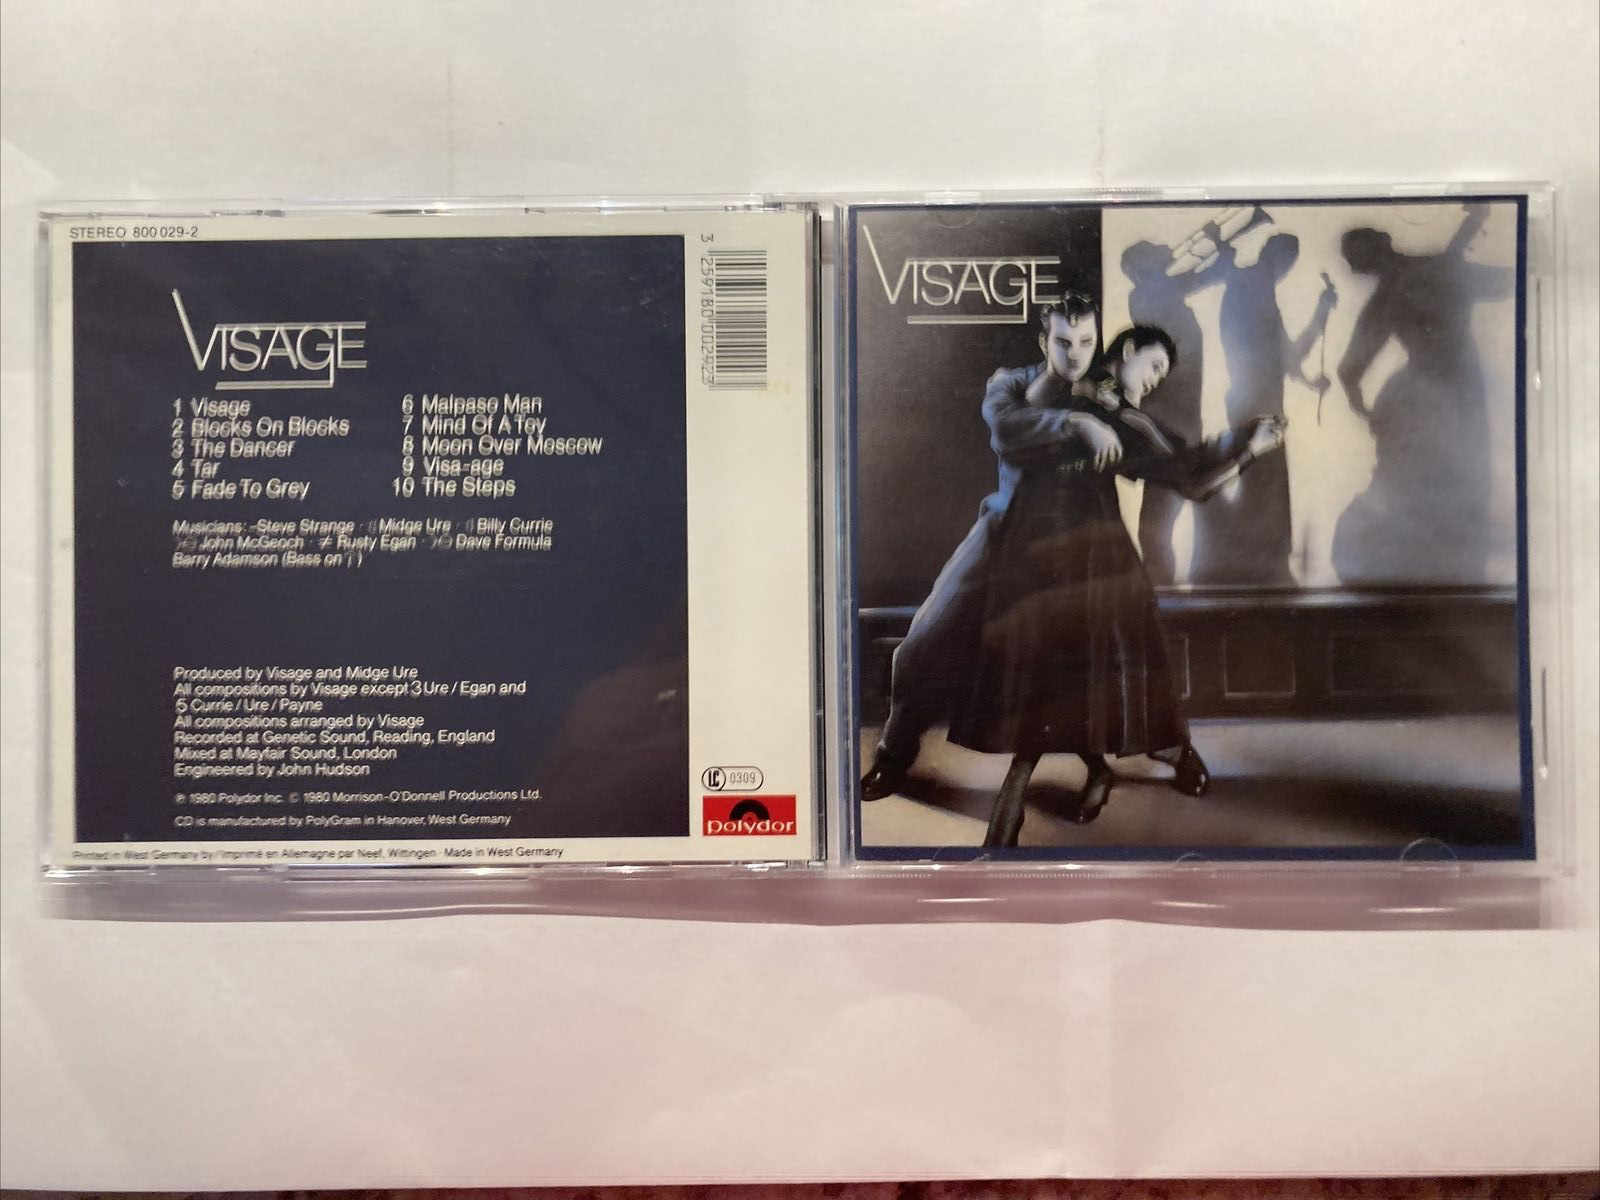 Visage - Visage - Used CD - Import - Made in W. Germany - Very Good Condition